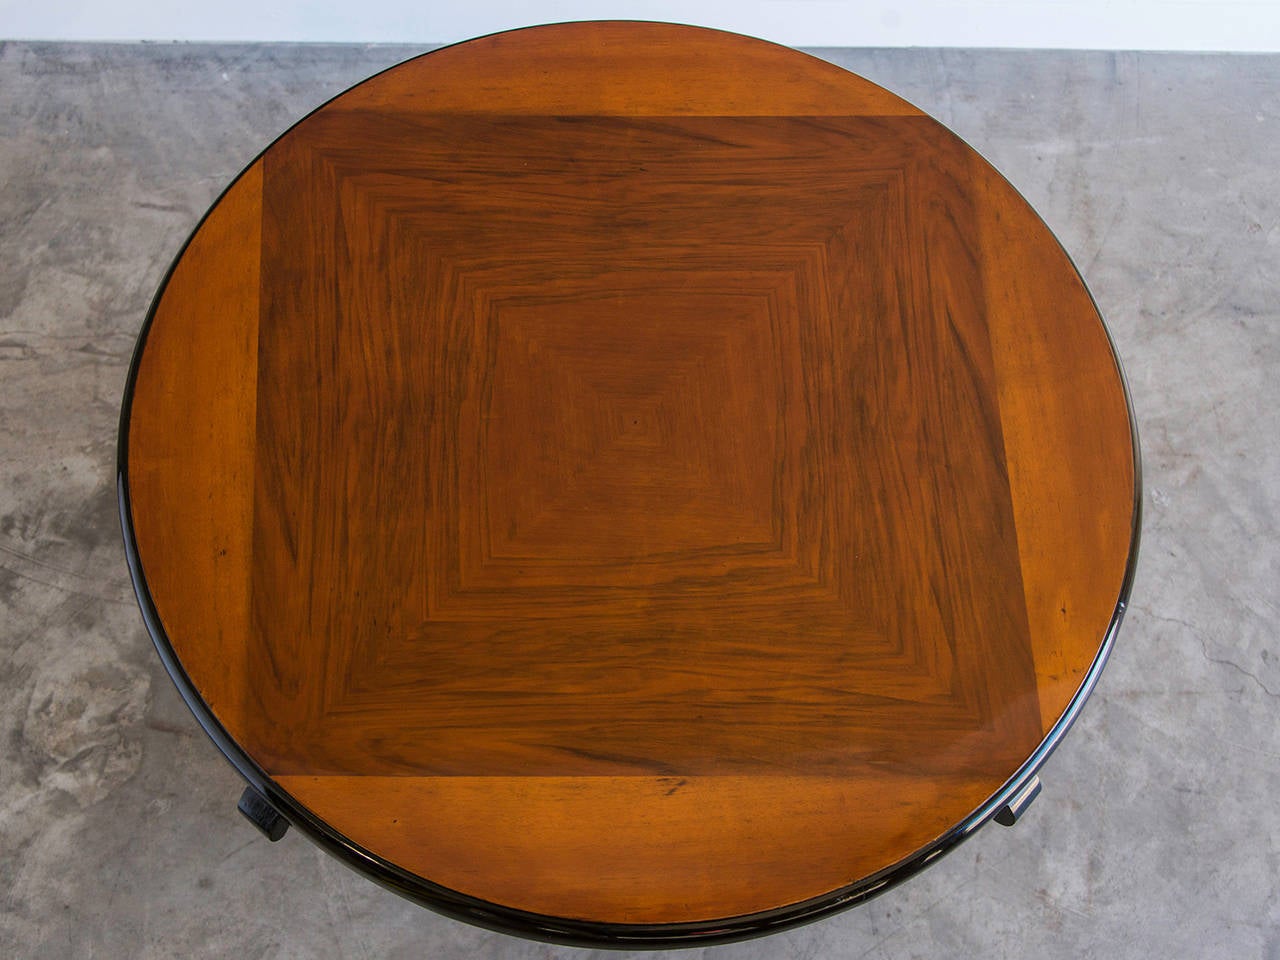 Receive our new selections direct from 1stdibs by email each week. Please click Follow Dealer below and see them first!

Vintage French Art Deco period burl walnut and ebonized timber table circa 1930. The beautiful balance of the four gently